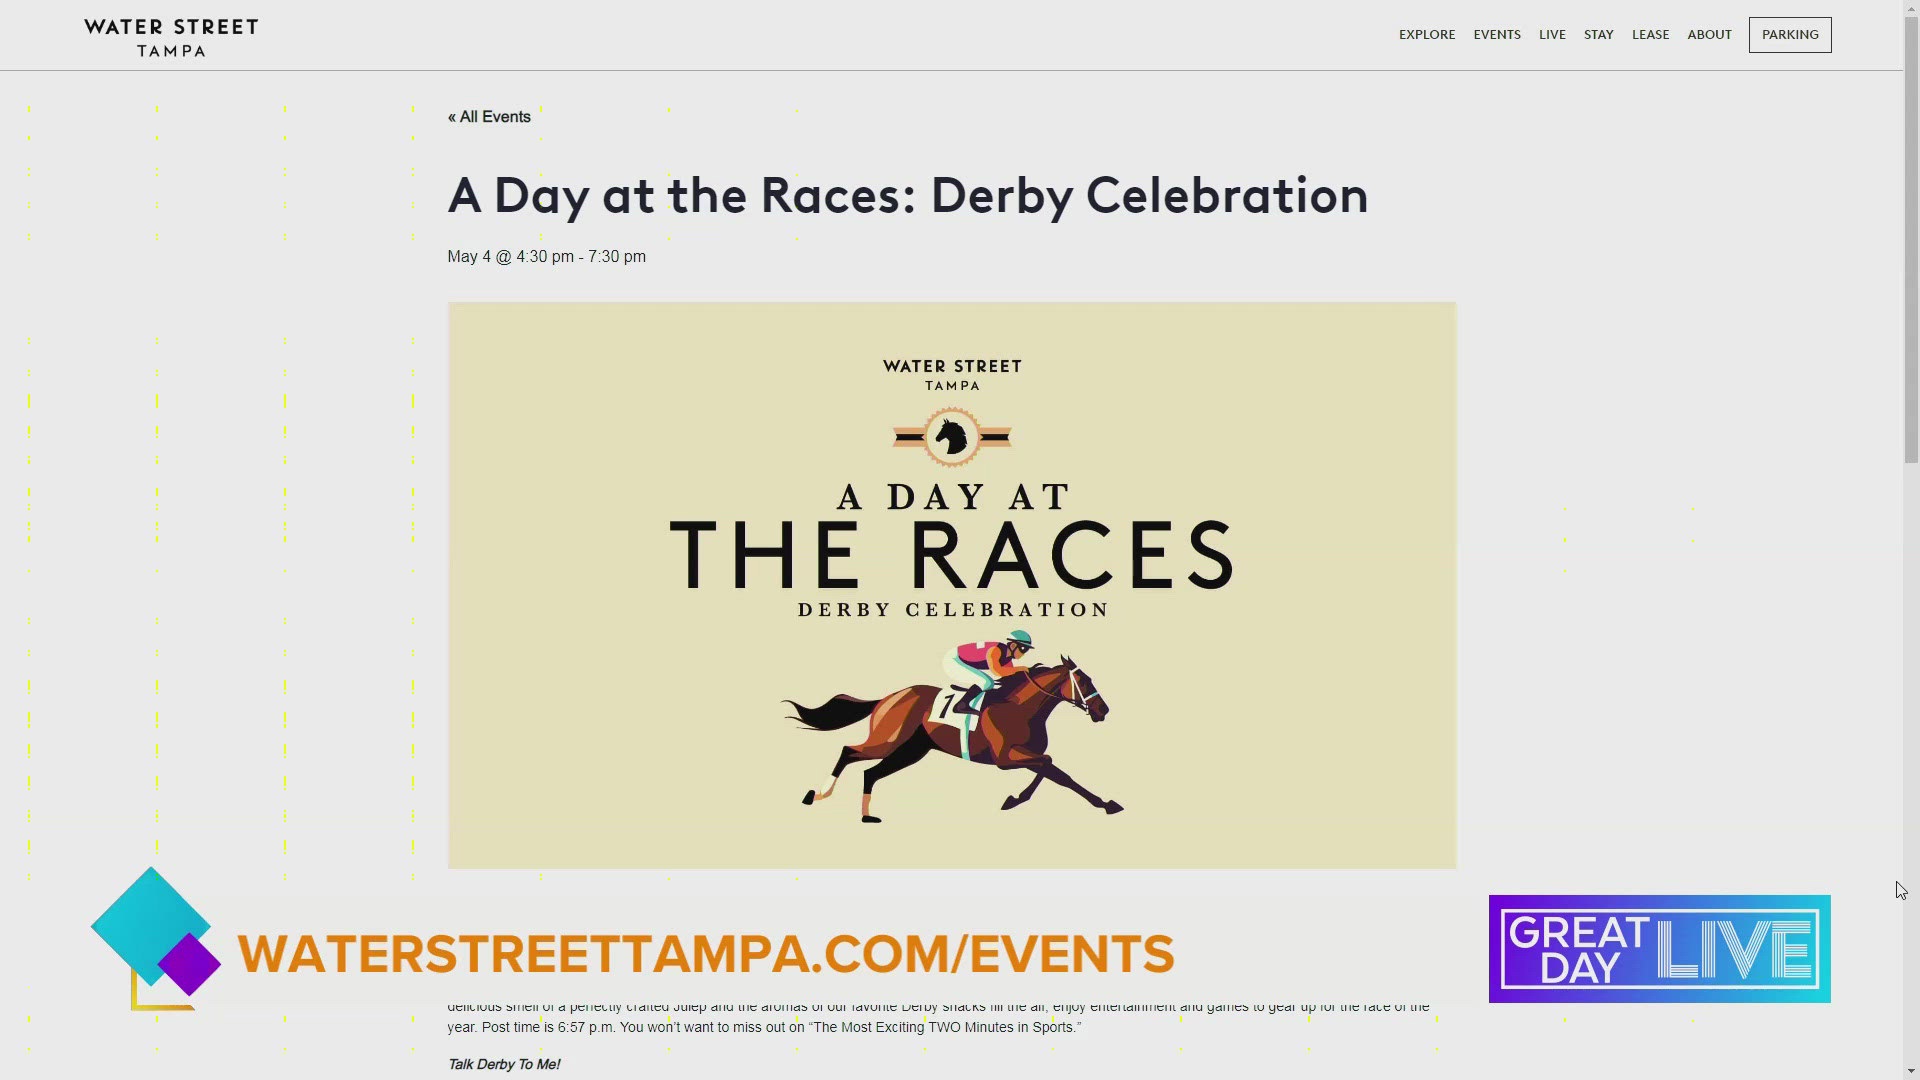 Water Street Tampa presents "A Day At The Races." For more information visit waterstreettampa.com/events.